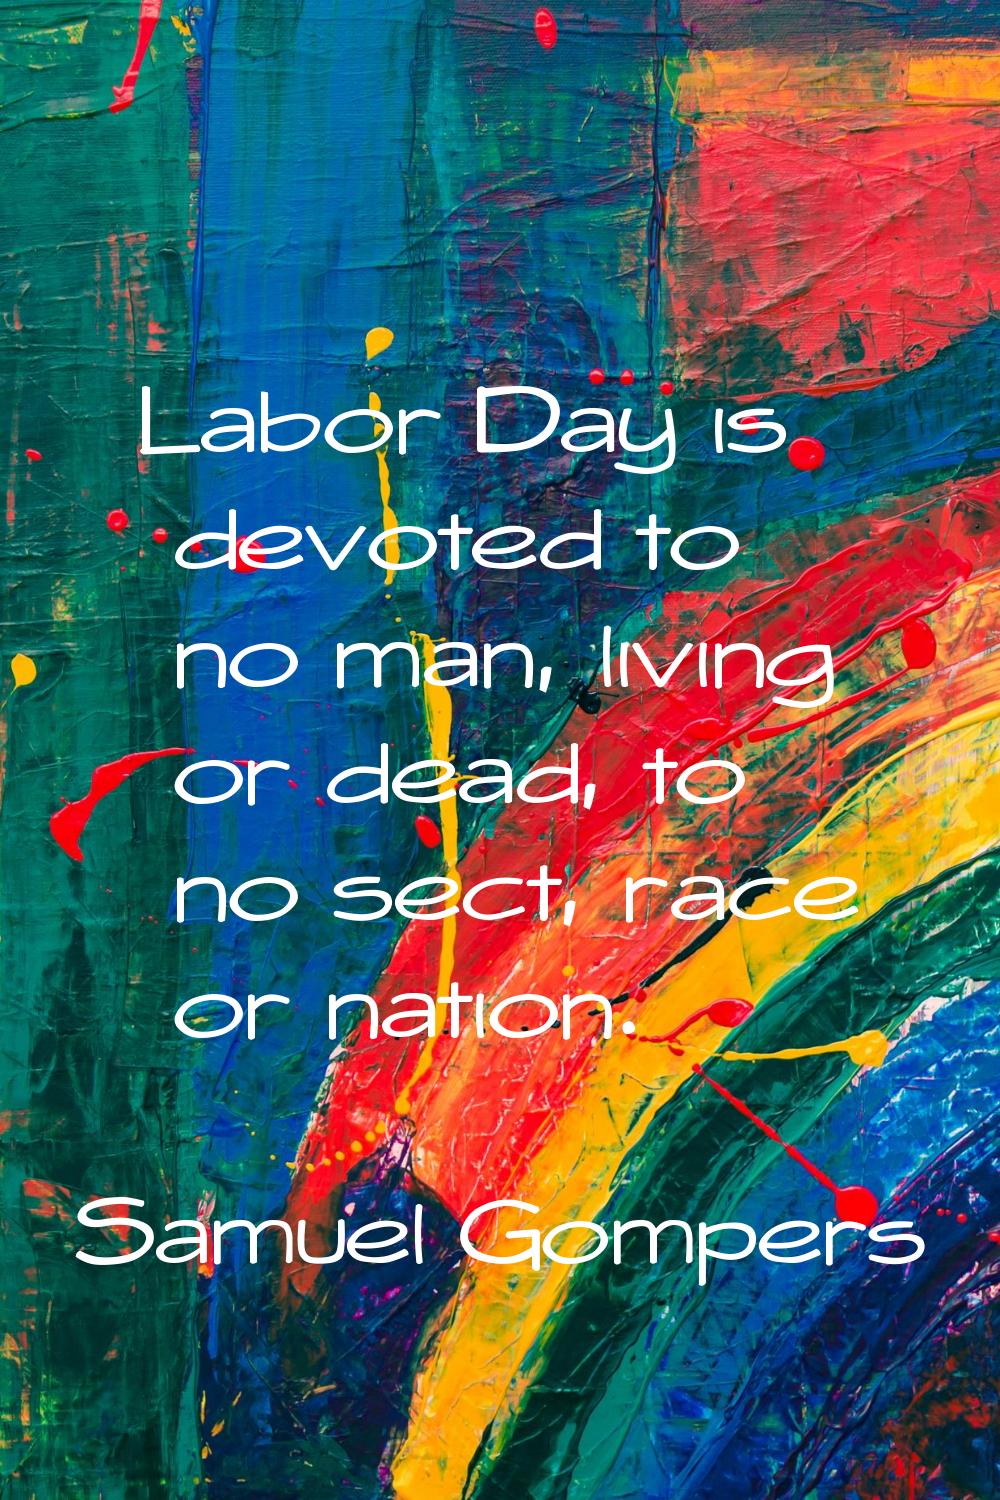 Labor Day is devoted to no man, living or dead, to no sect, race or nation.